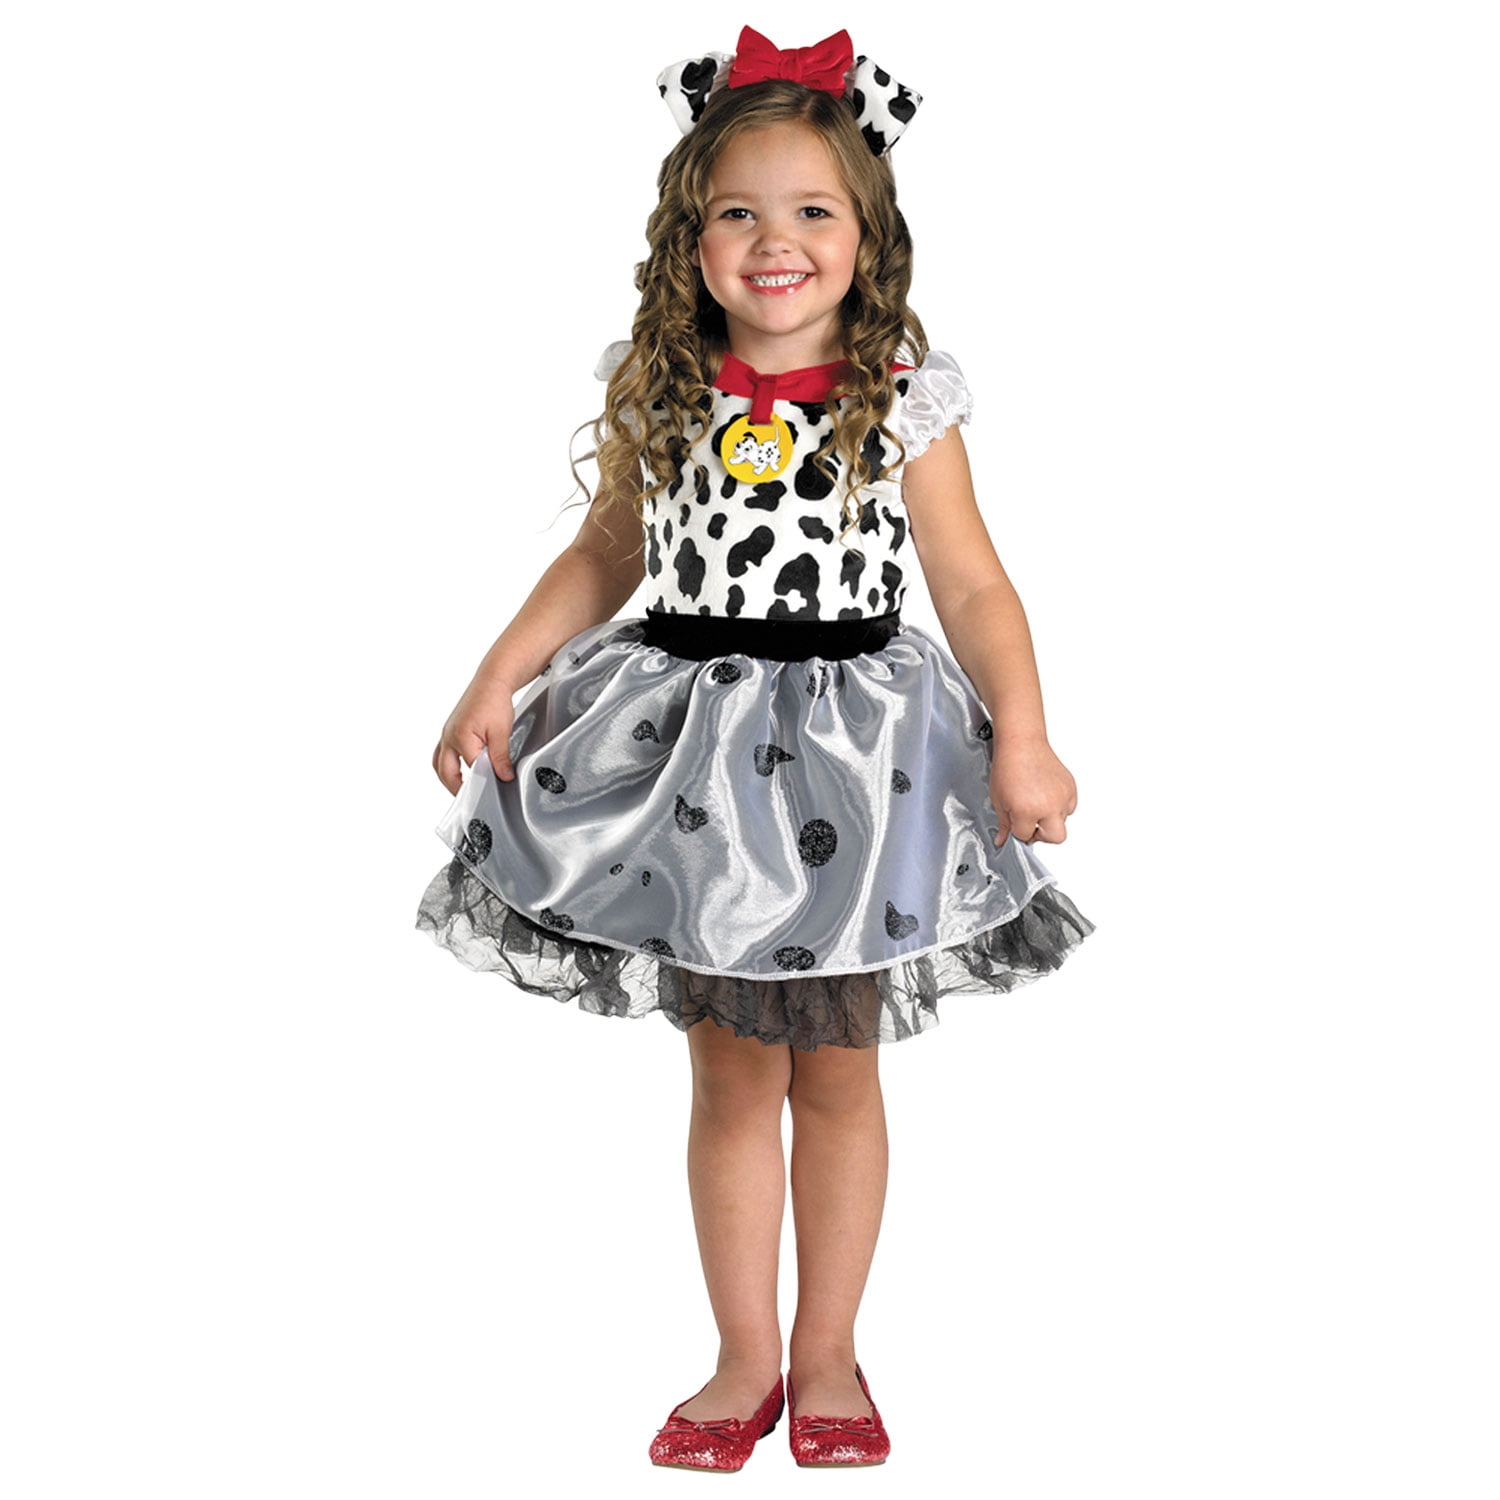 Dalmatian Costume for Toddlers Classic Size Small 2T 101 Dalmatians 